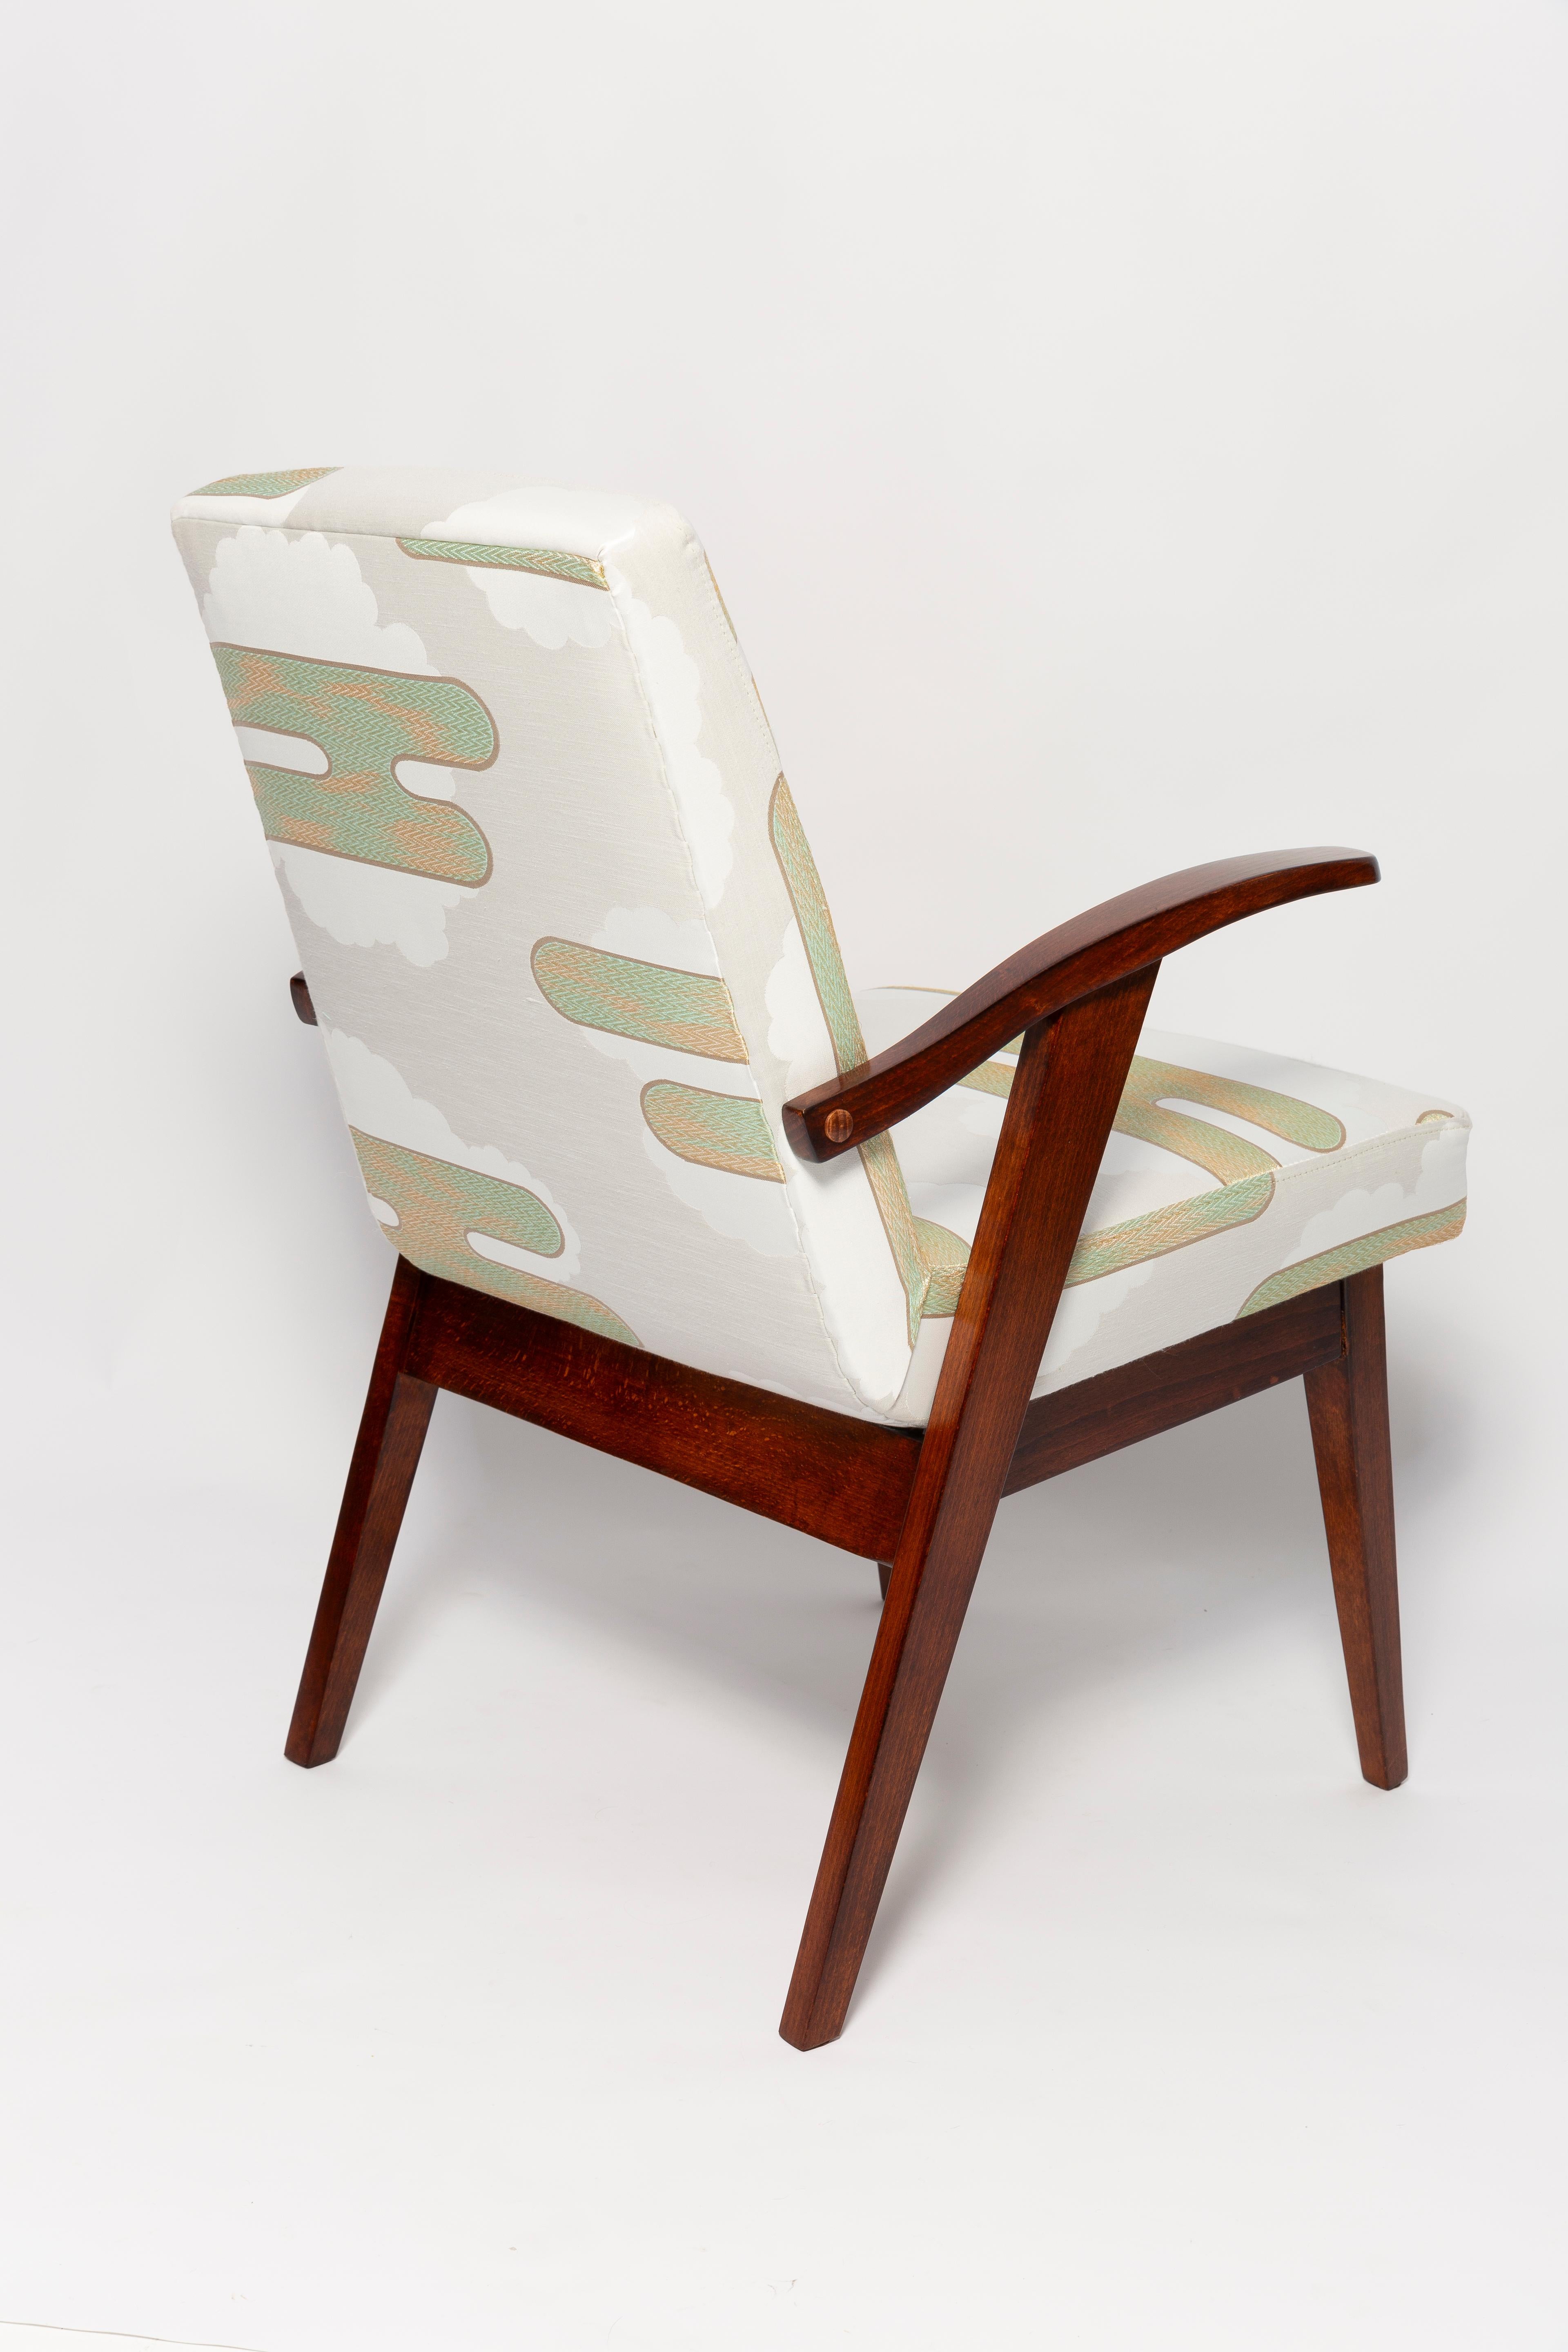 Four Mid Century Lontano Jacquard Green Armchairs by M. Puchala, Europe, 1960s For Sale 3